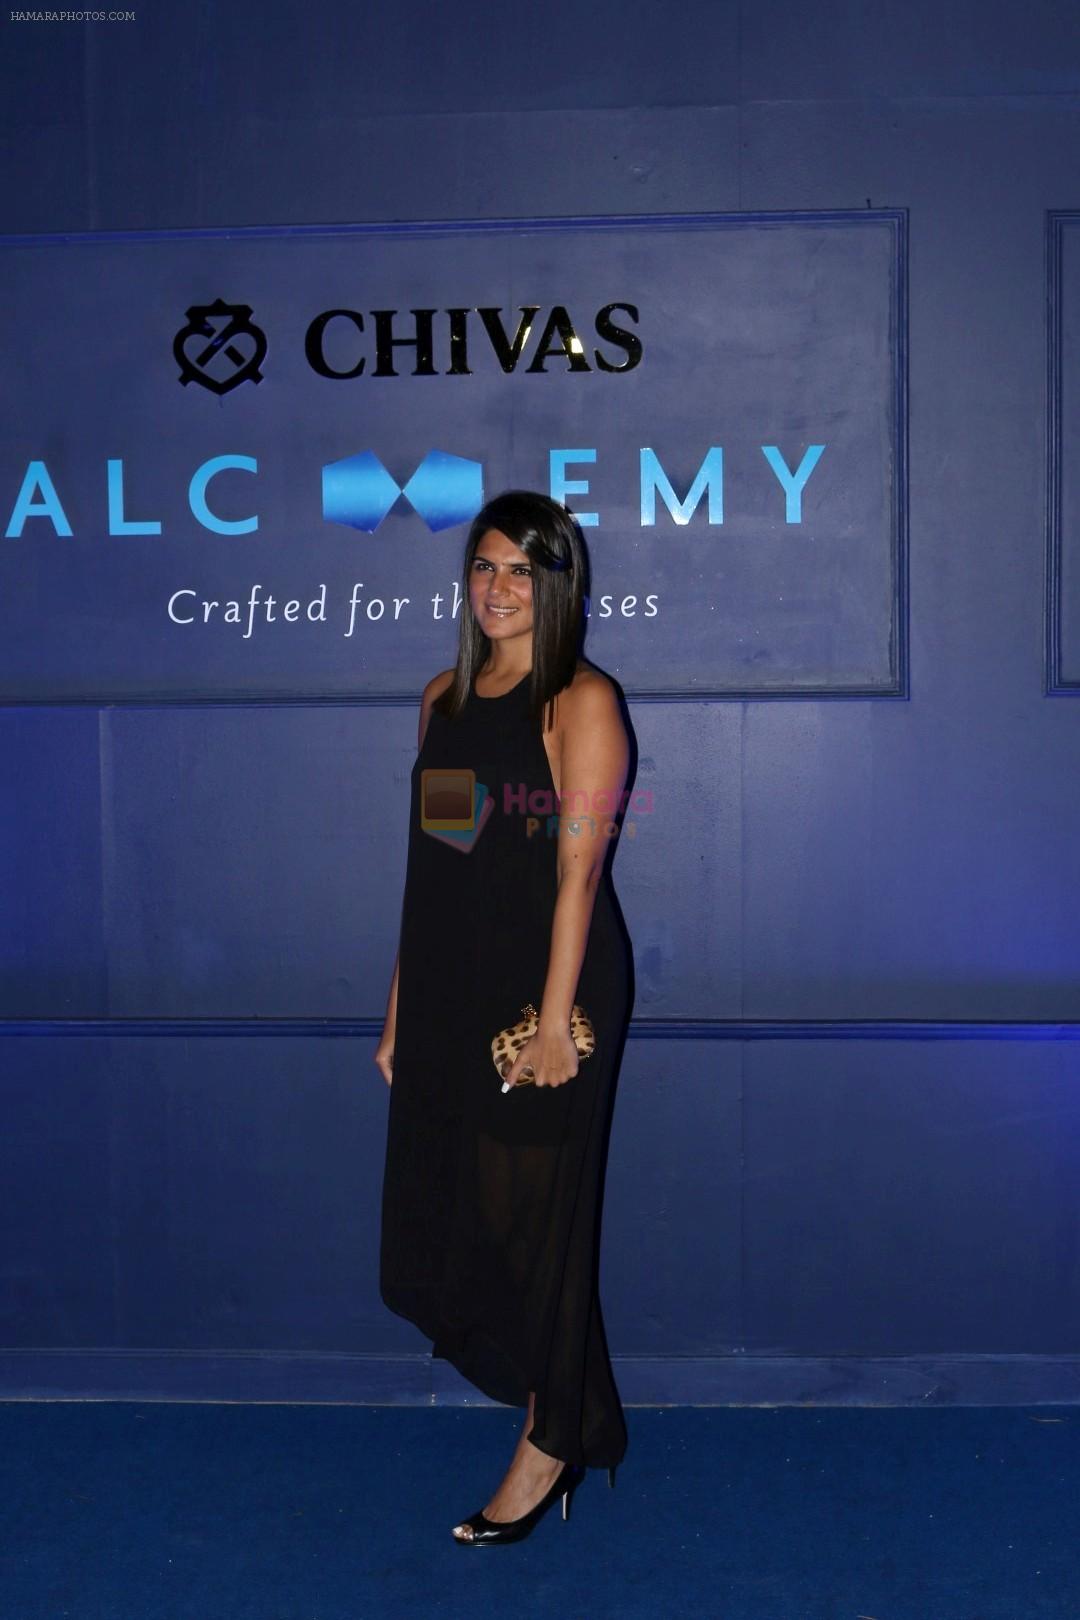 at Chivas Regal 18 Alchemy-Crafted For The Senses on 25th March 2017